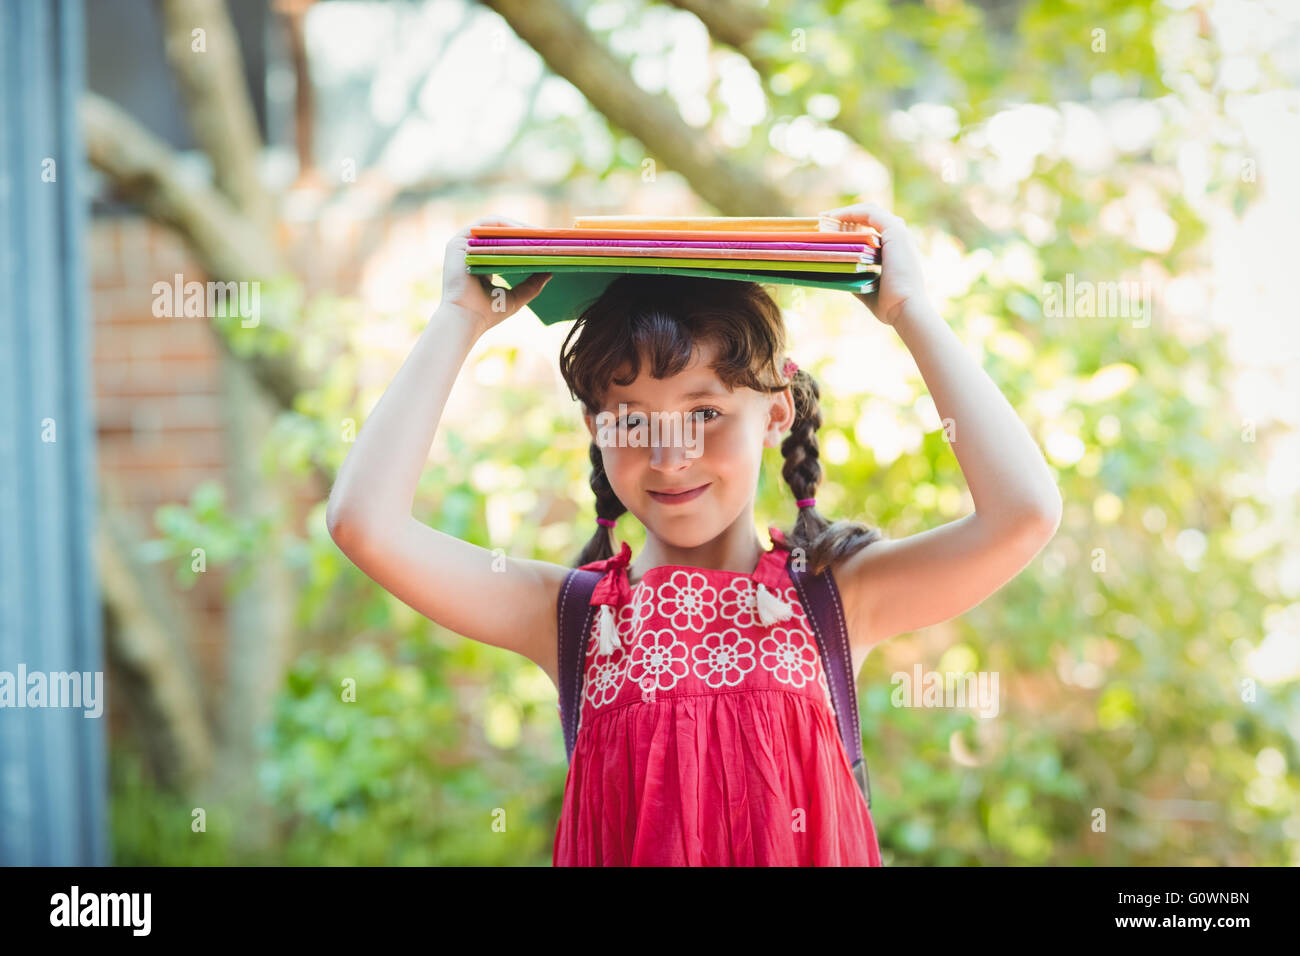 Girl holding books on her heads Stock Photo